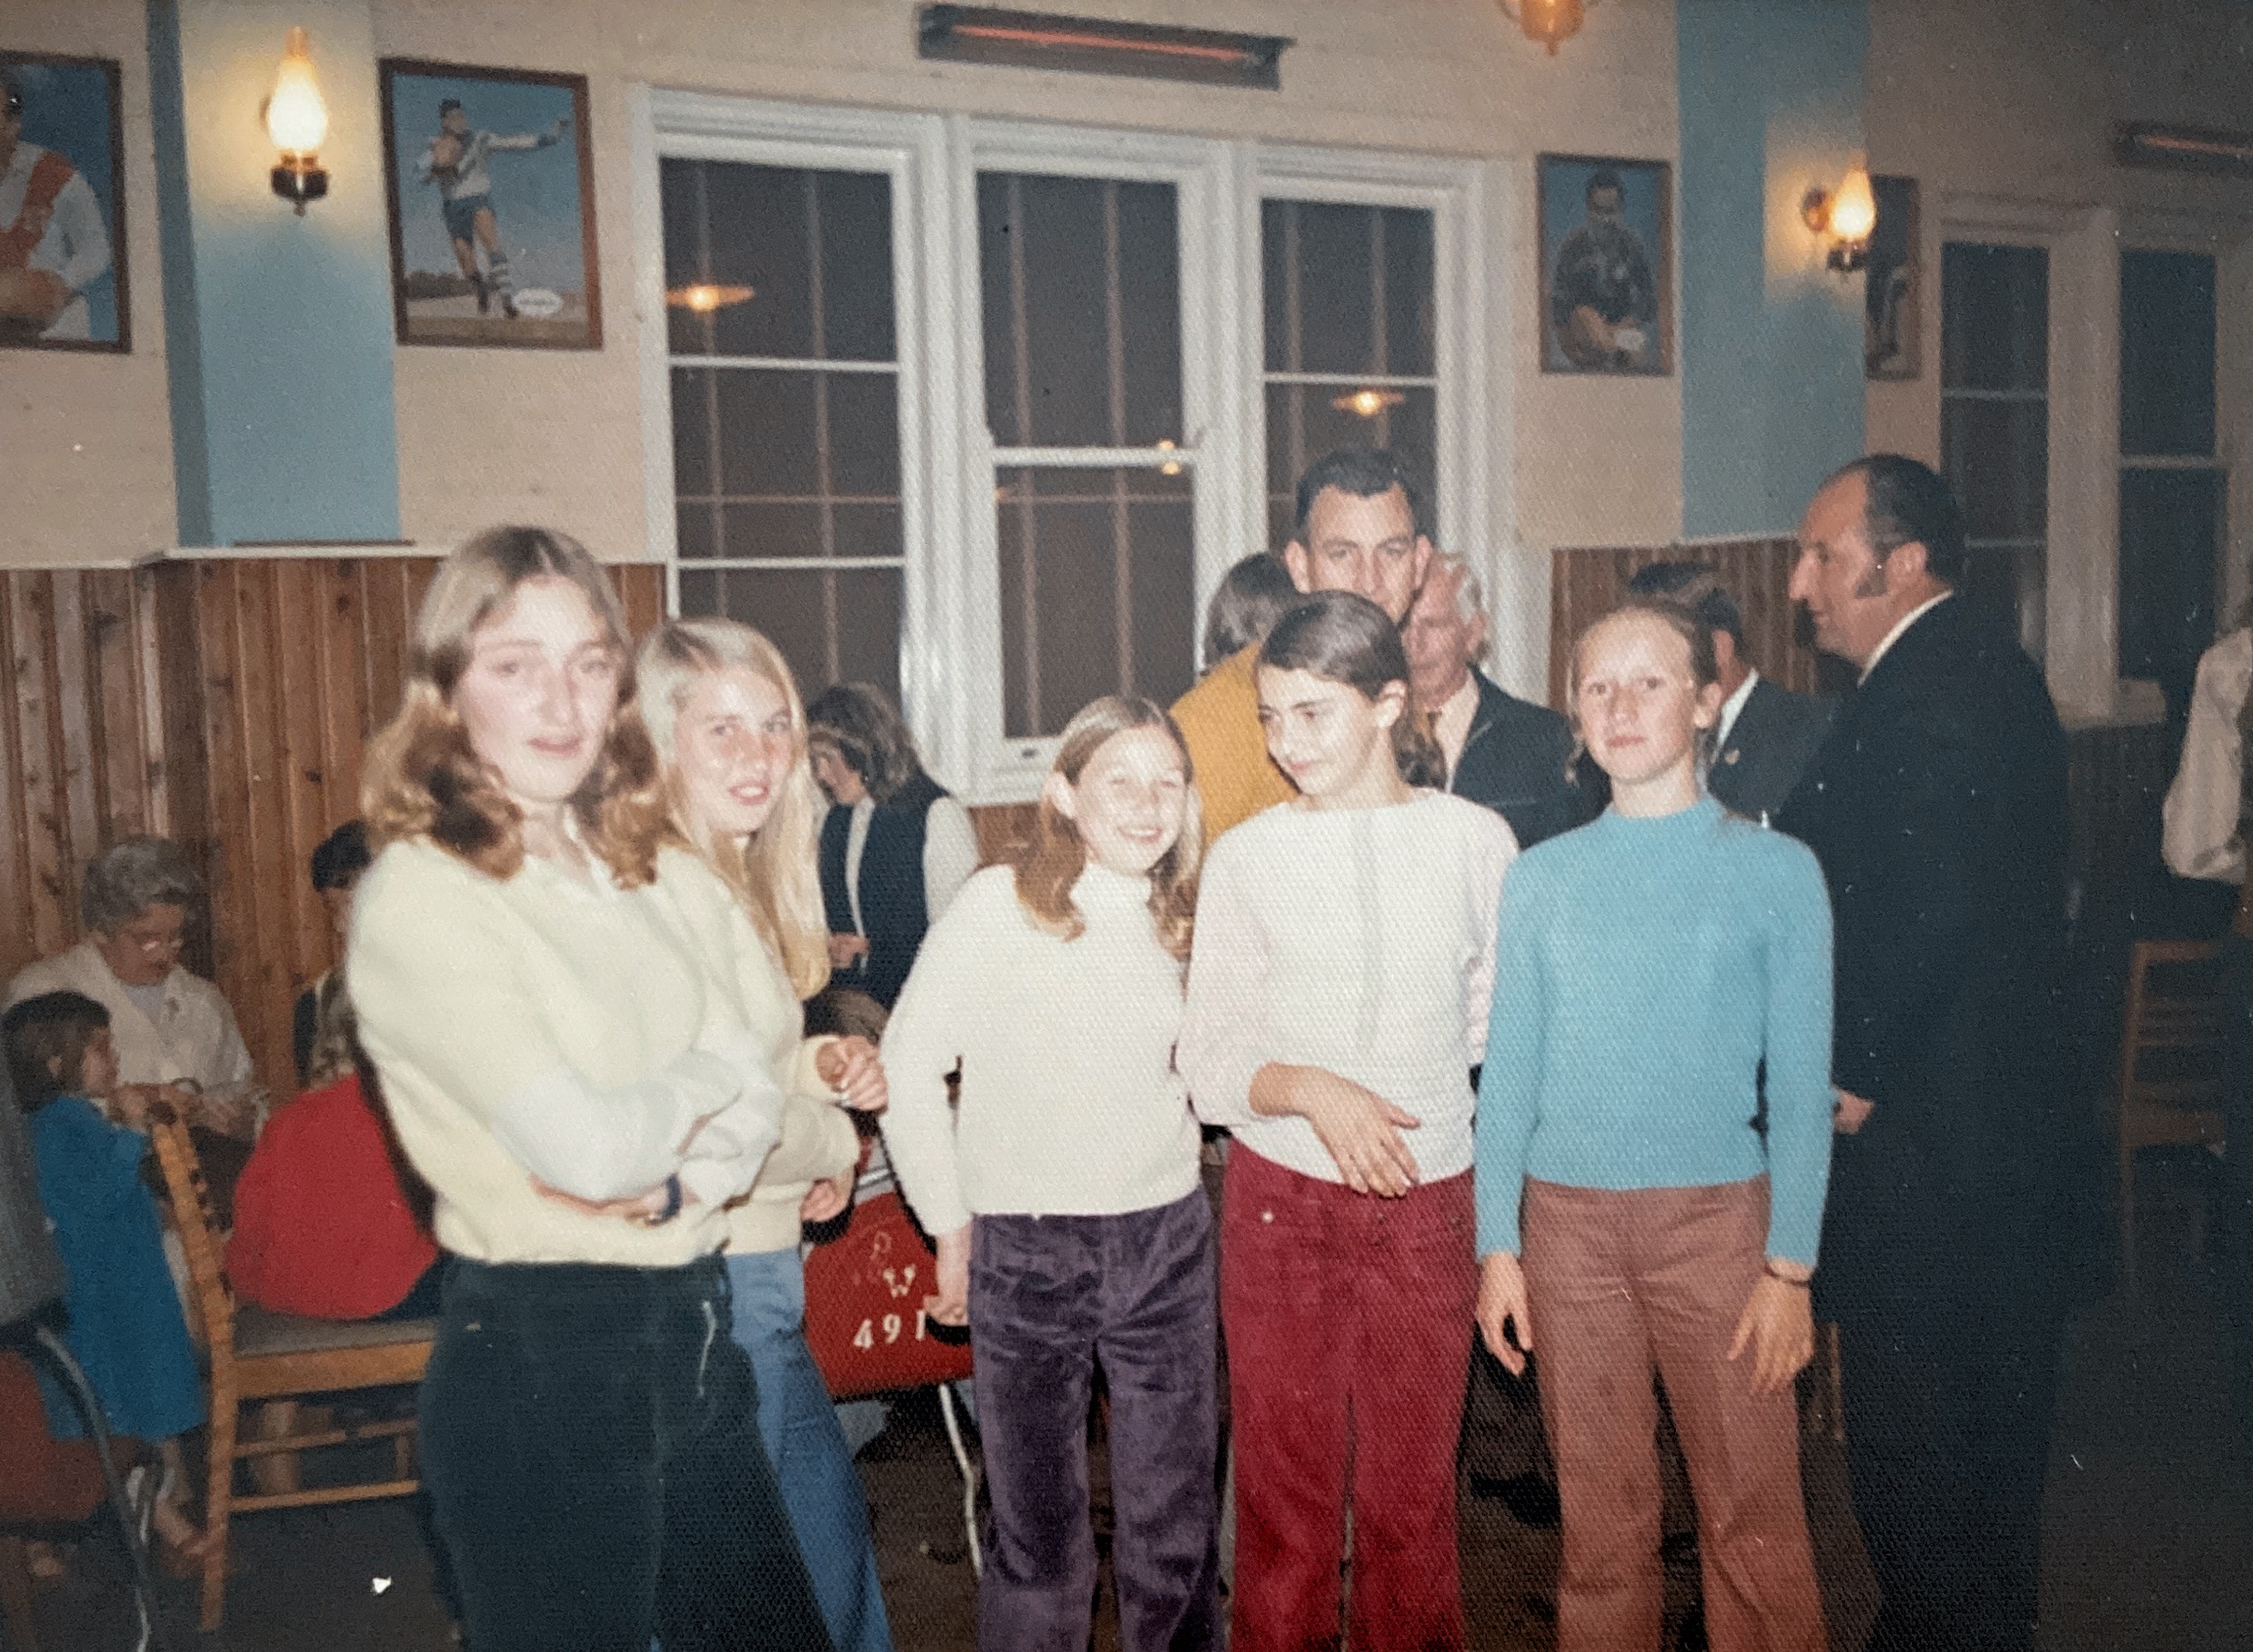 This photo was taken at Allen Baxter’s 21st in July 1973. In the foreground are Michelle Collins, Wendy Hill, Robyn Hill, Joanne Collins and Judy Geale. In the background are Albie Geale in a mustard shirt and Bob Collins in the dark suit.